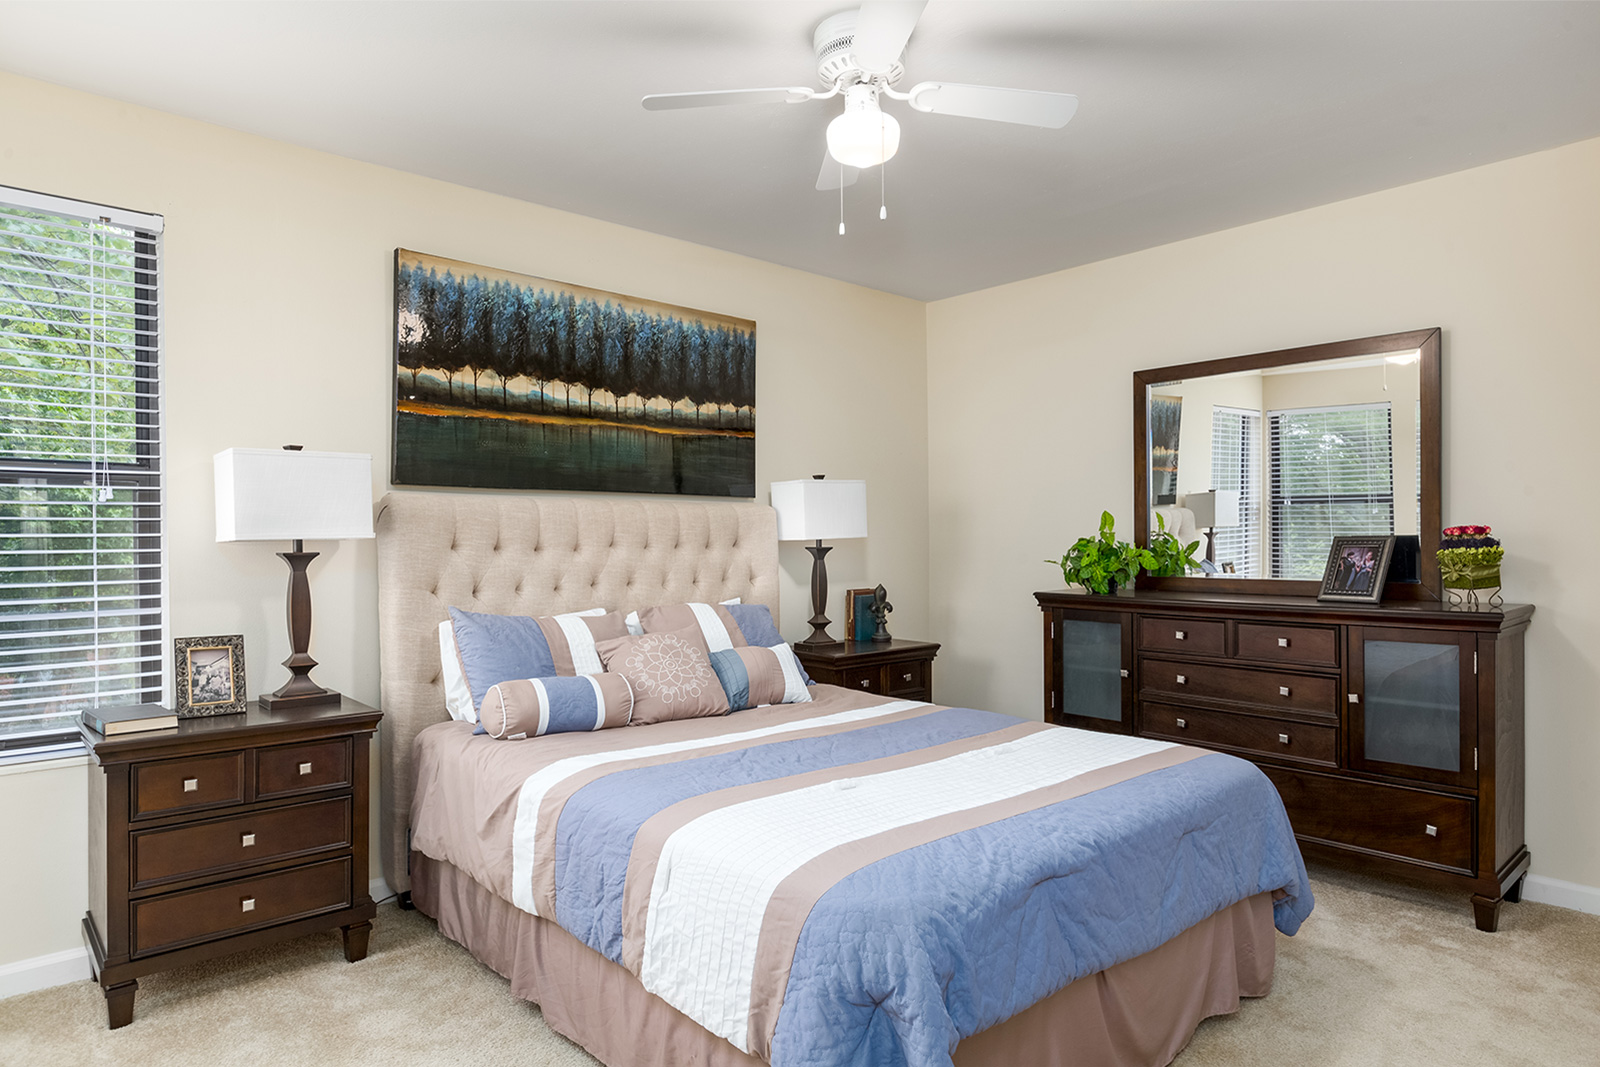 A bedroom at Chesterfield Village Apartments